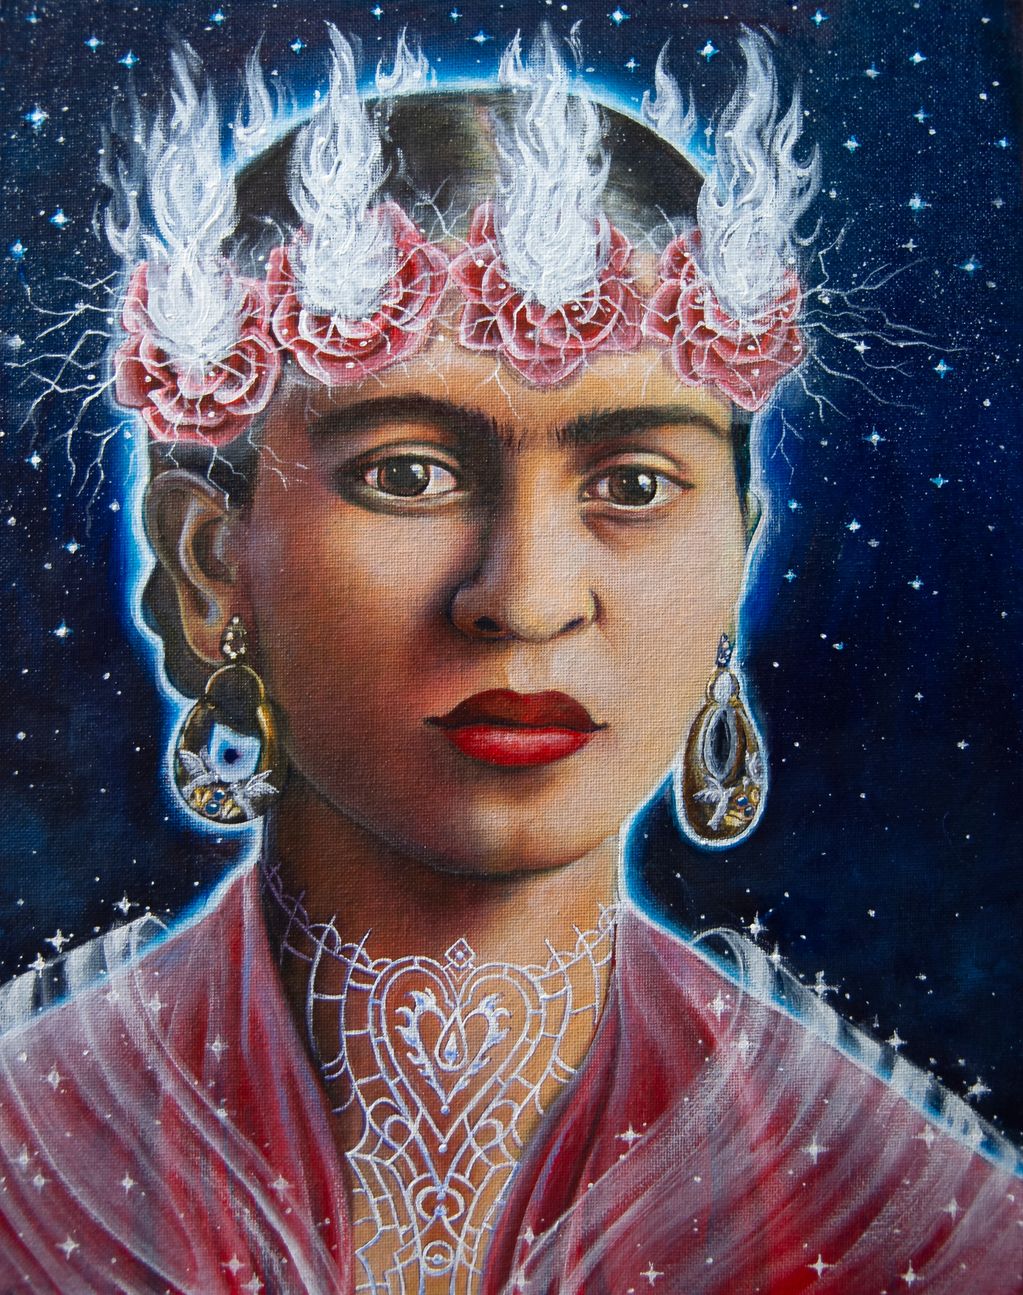 Frida Kahlo in red with fire crown of roses